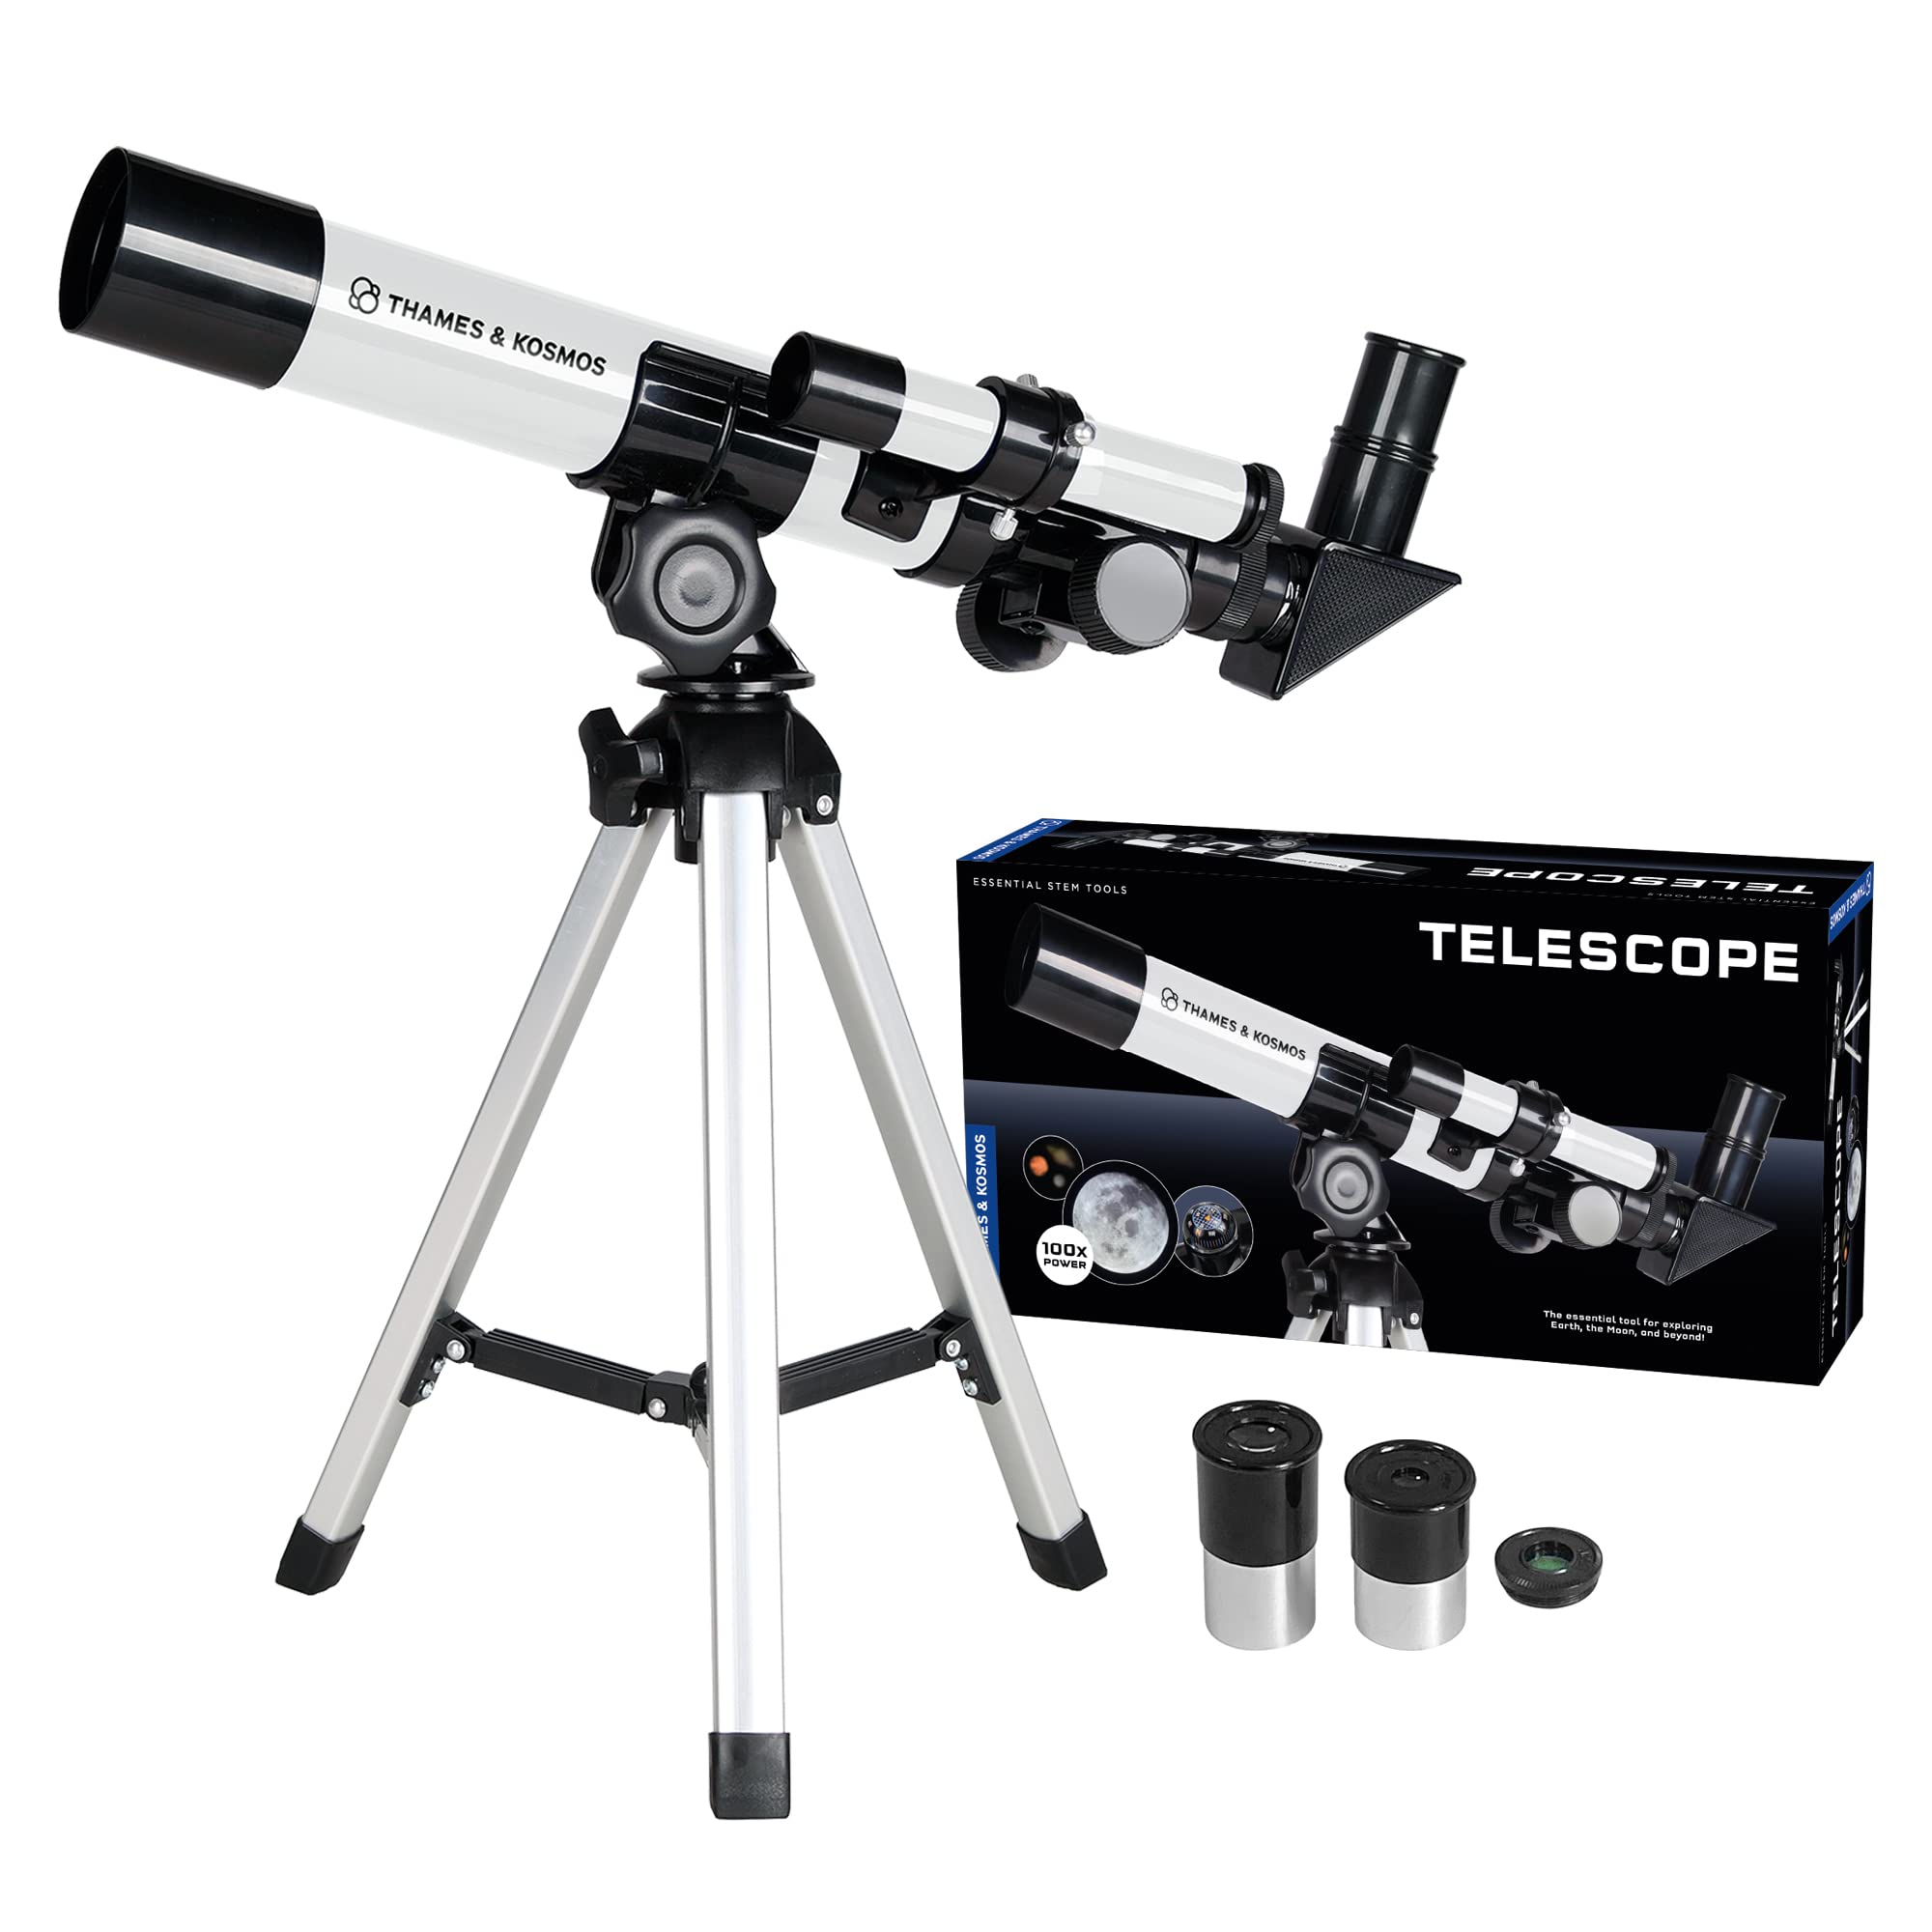 The Thames & Kosmos Telescope Essential STEM Tool | Entry-Level Refractor Telescope with 100x Magnification & Built-in Compass | Classic Scientific Device for Astronomical & Terrestrial Observations